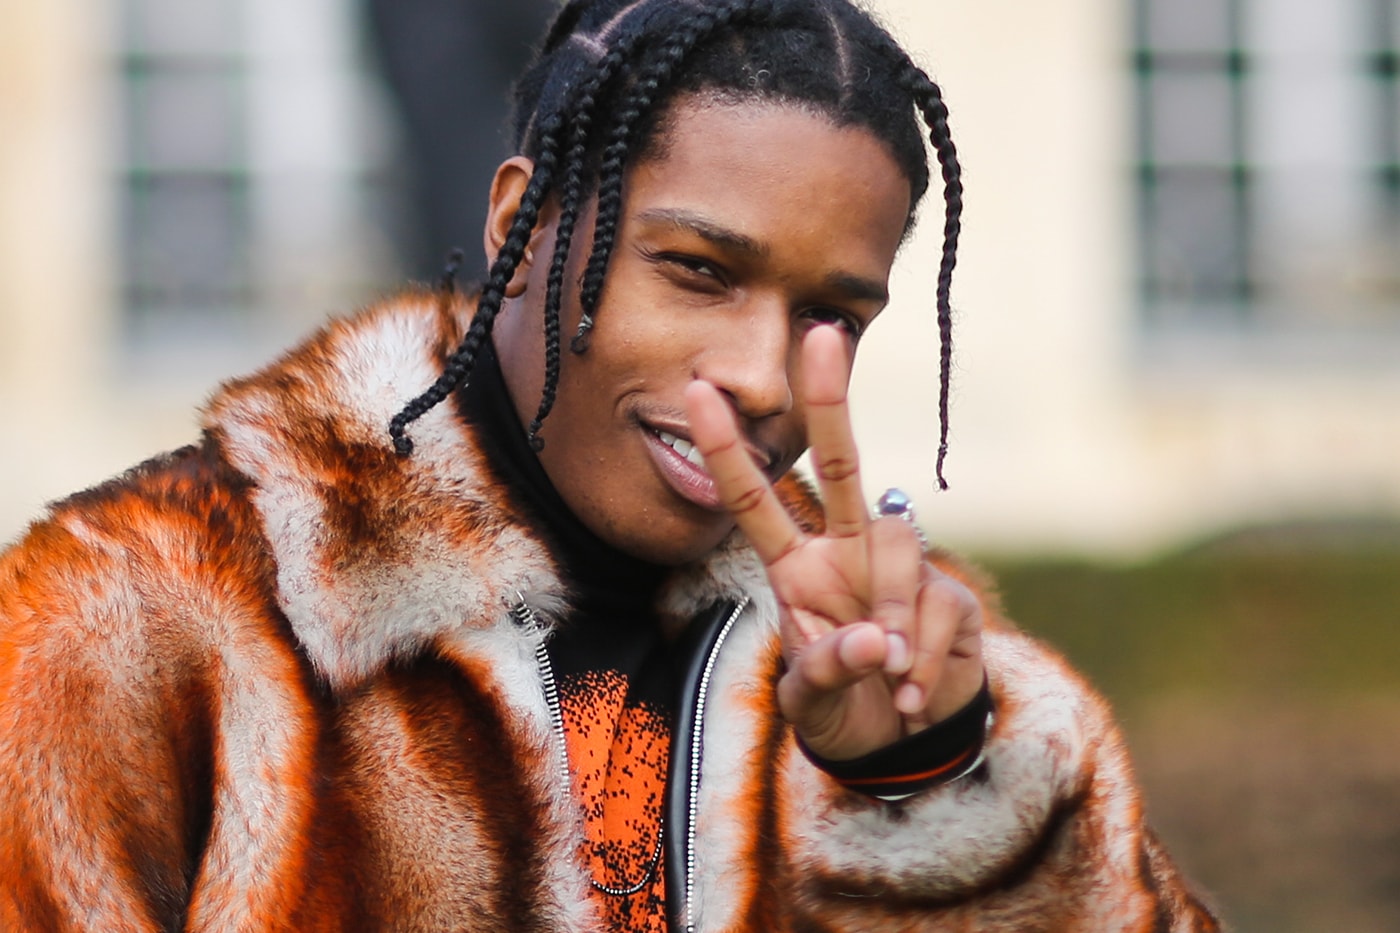 Asap Rocky Klarna Investment New Temporary CEO Sweden